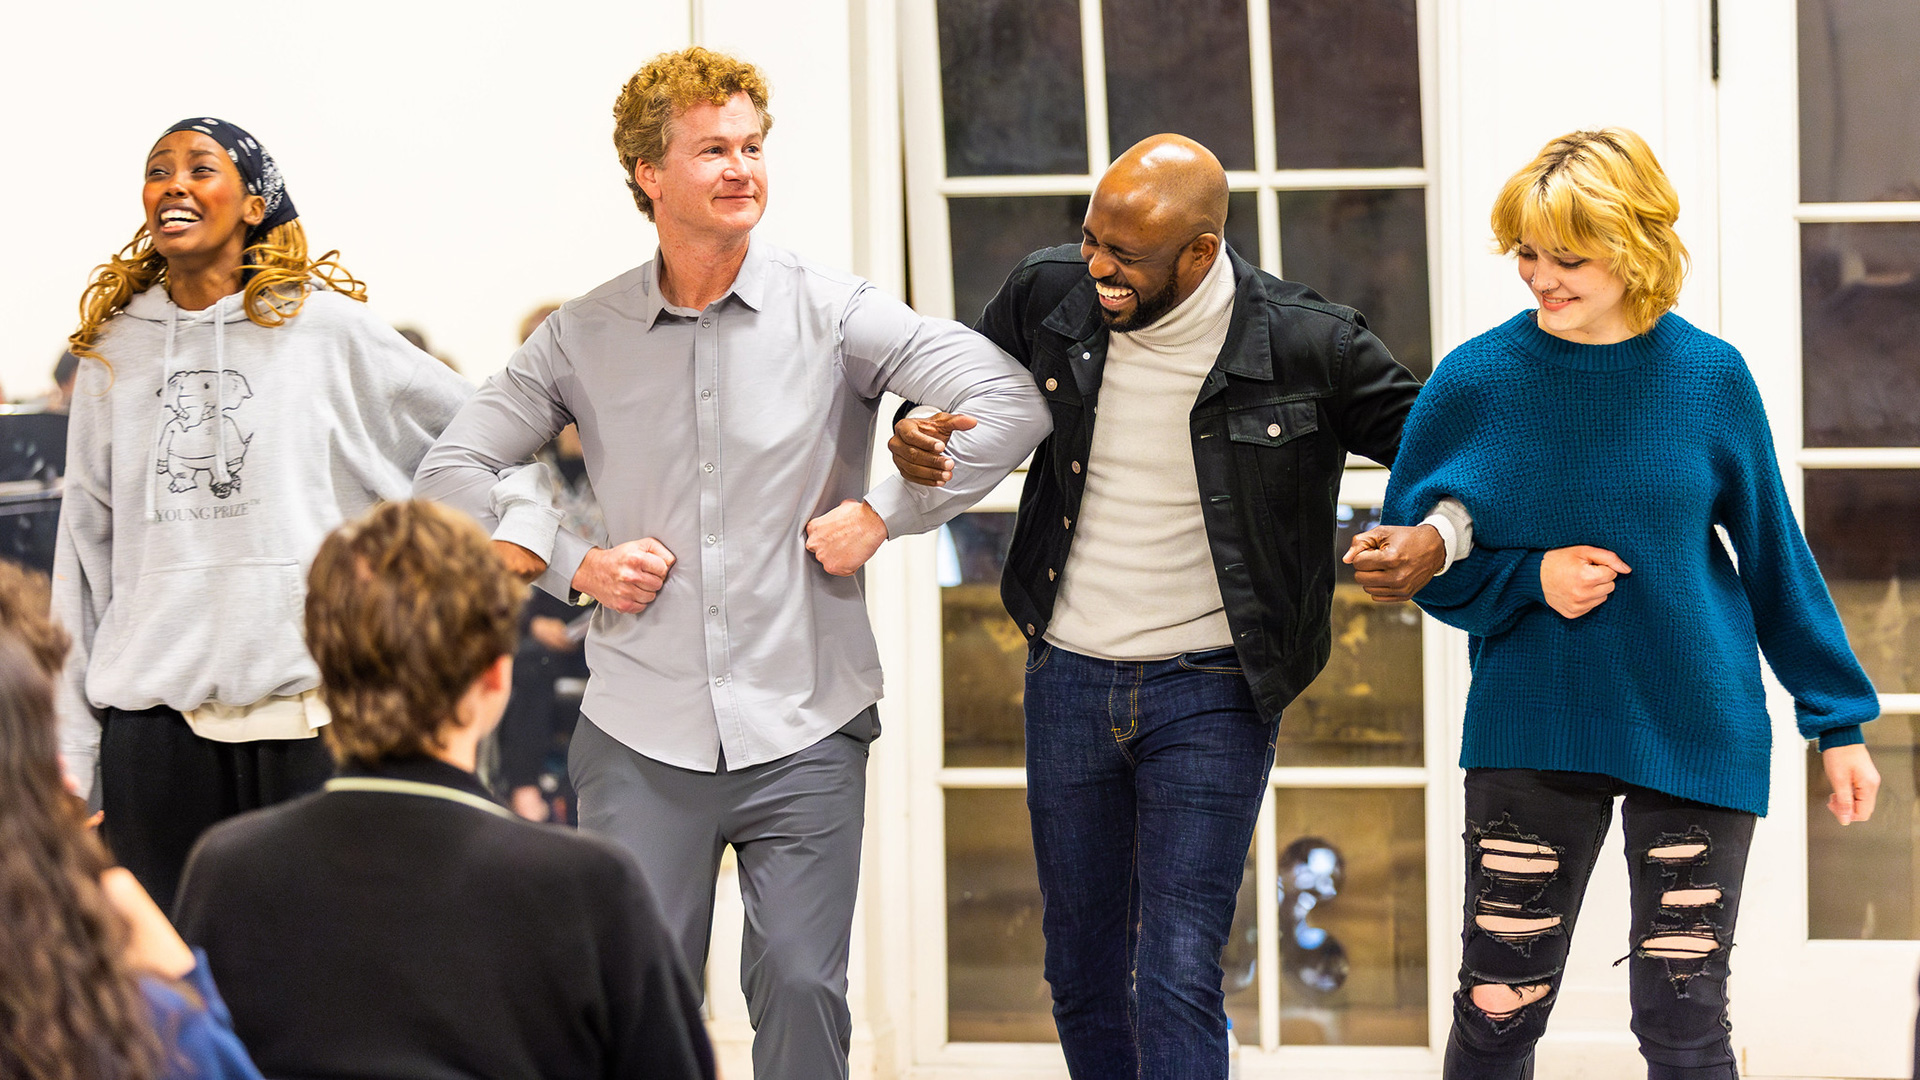 featured image for ‘The Mount Rushmore of improv’: Wayne Brady teaches masterclass to USC theater students